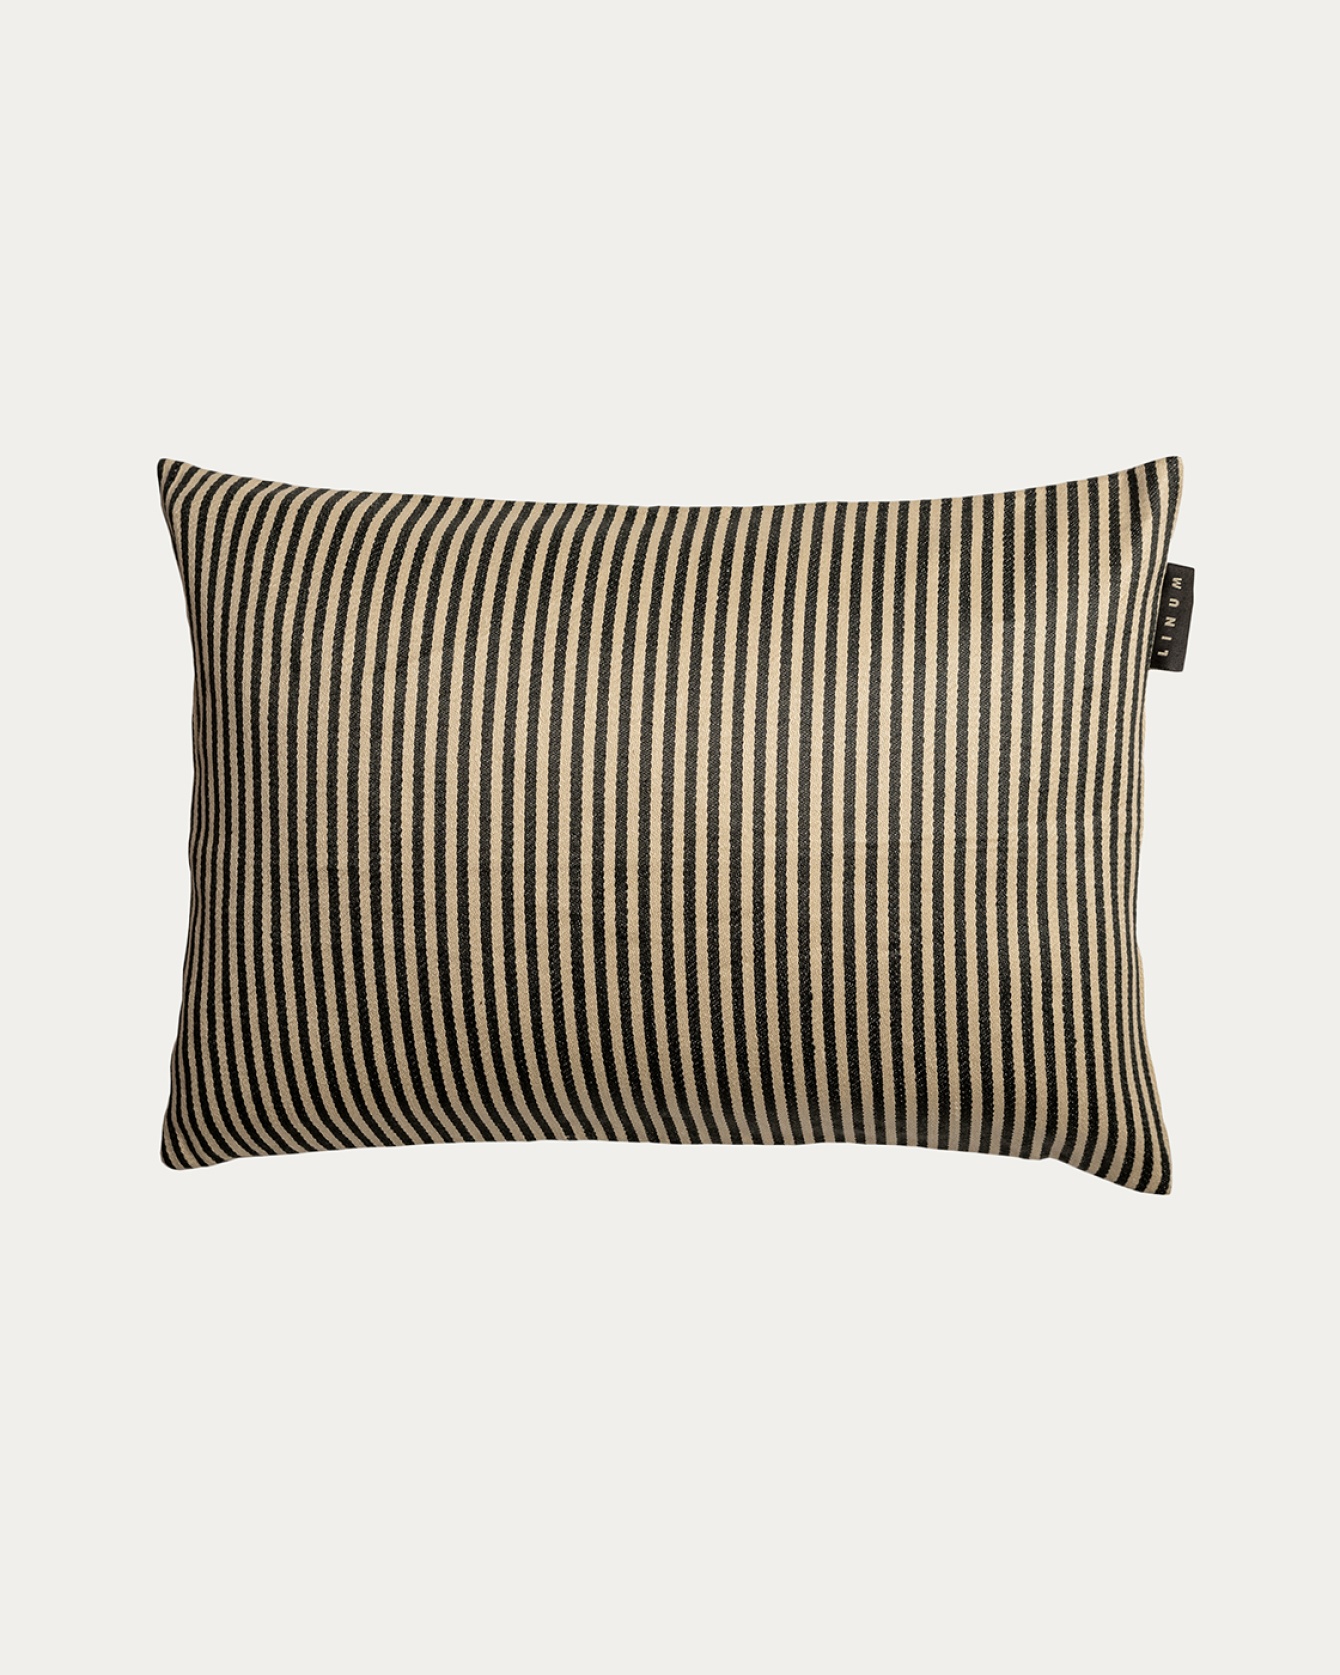 Product image dark charcoal grey CALCIO cushion cover with thin stripes of 77% linen and 23% cotton from LINUM DESIGN. Size 35x50 cm.